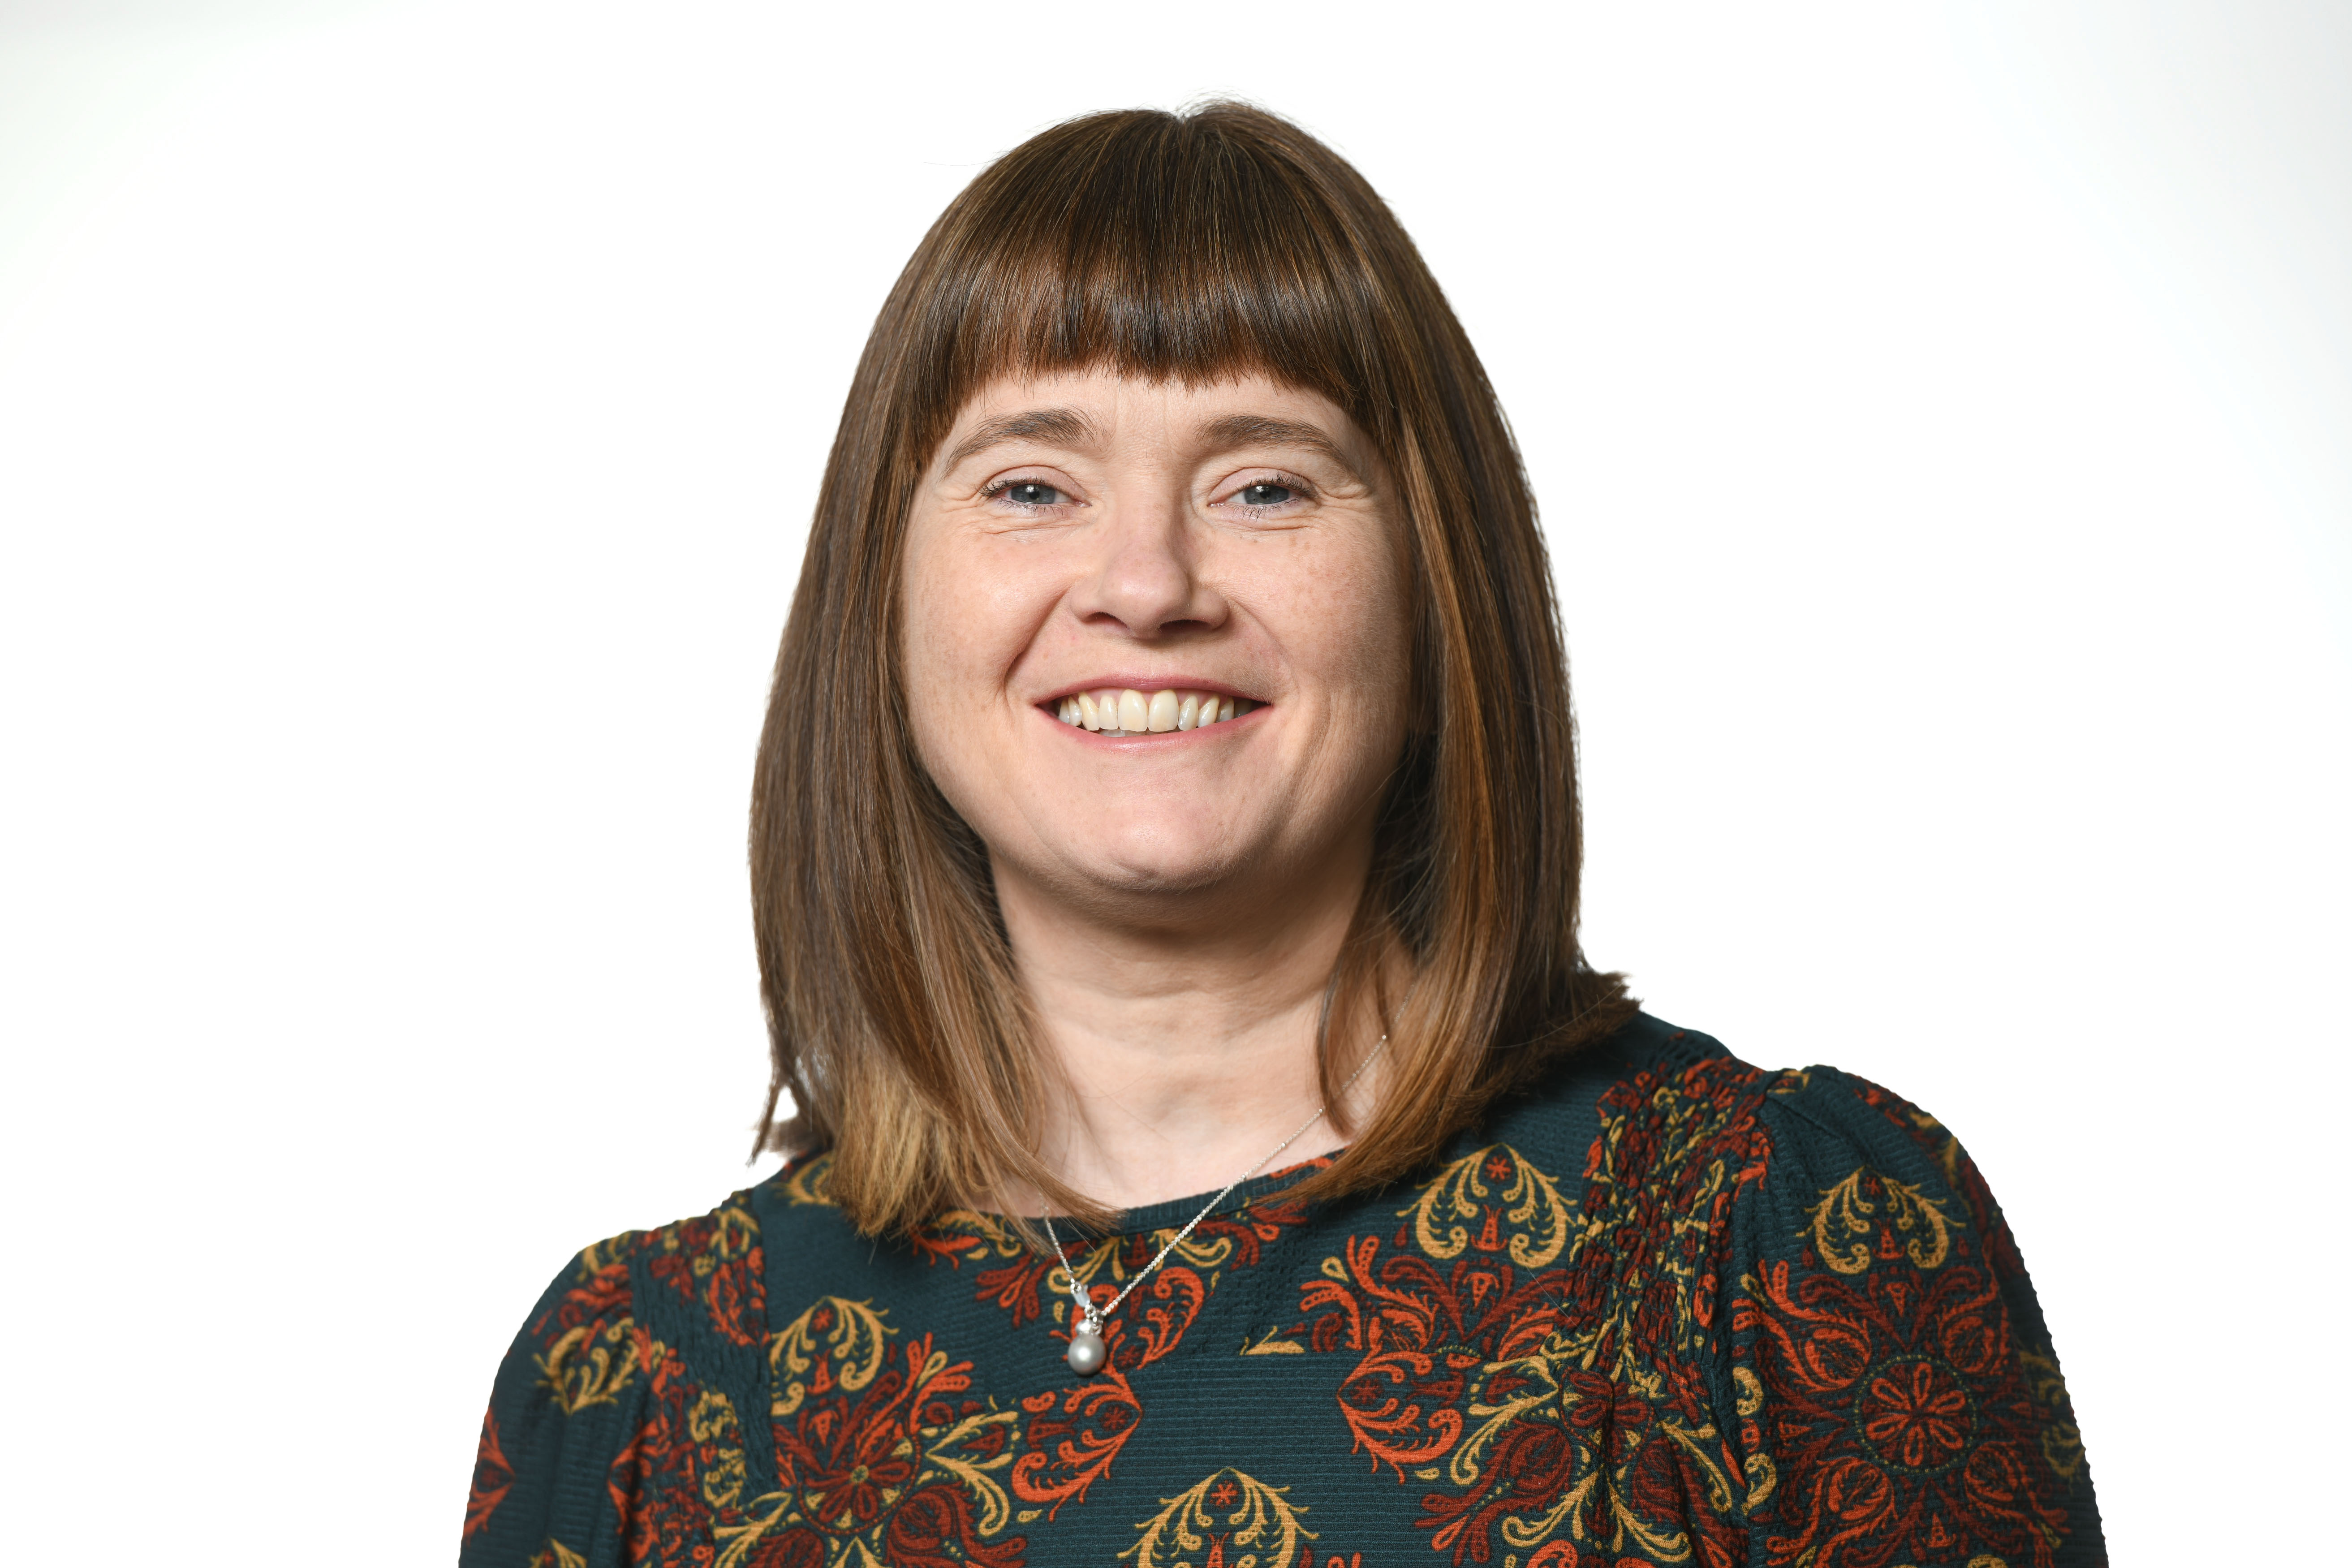 A profile picture of Sharron Dolan, the Head of Department, in the Department of Biological and Biomedical Sciences, at GCU.